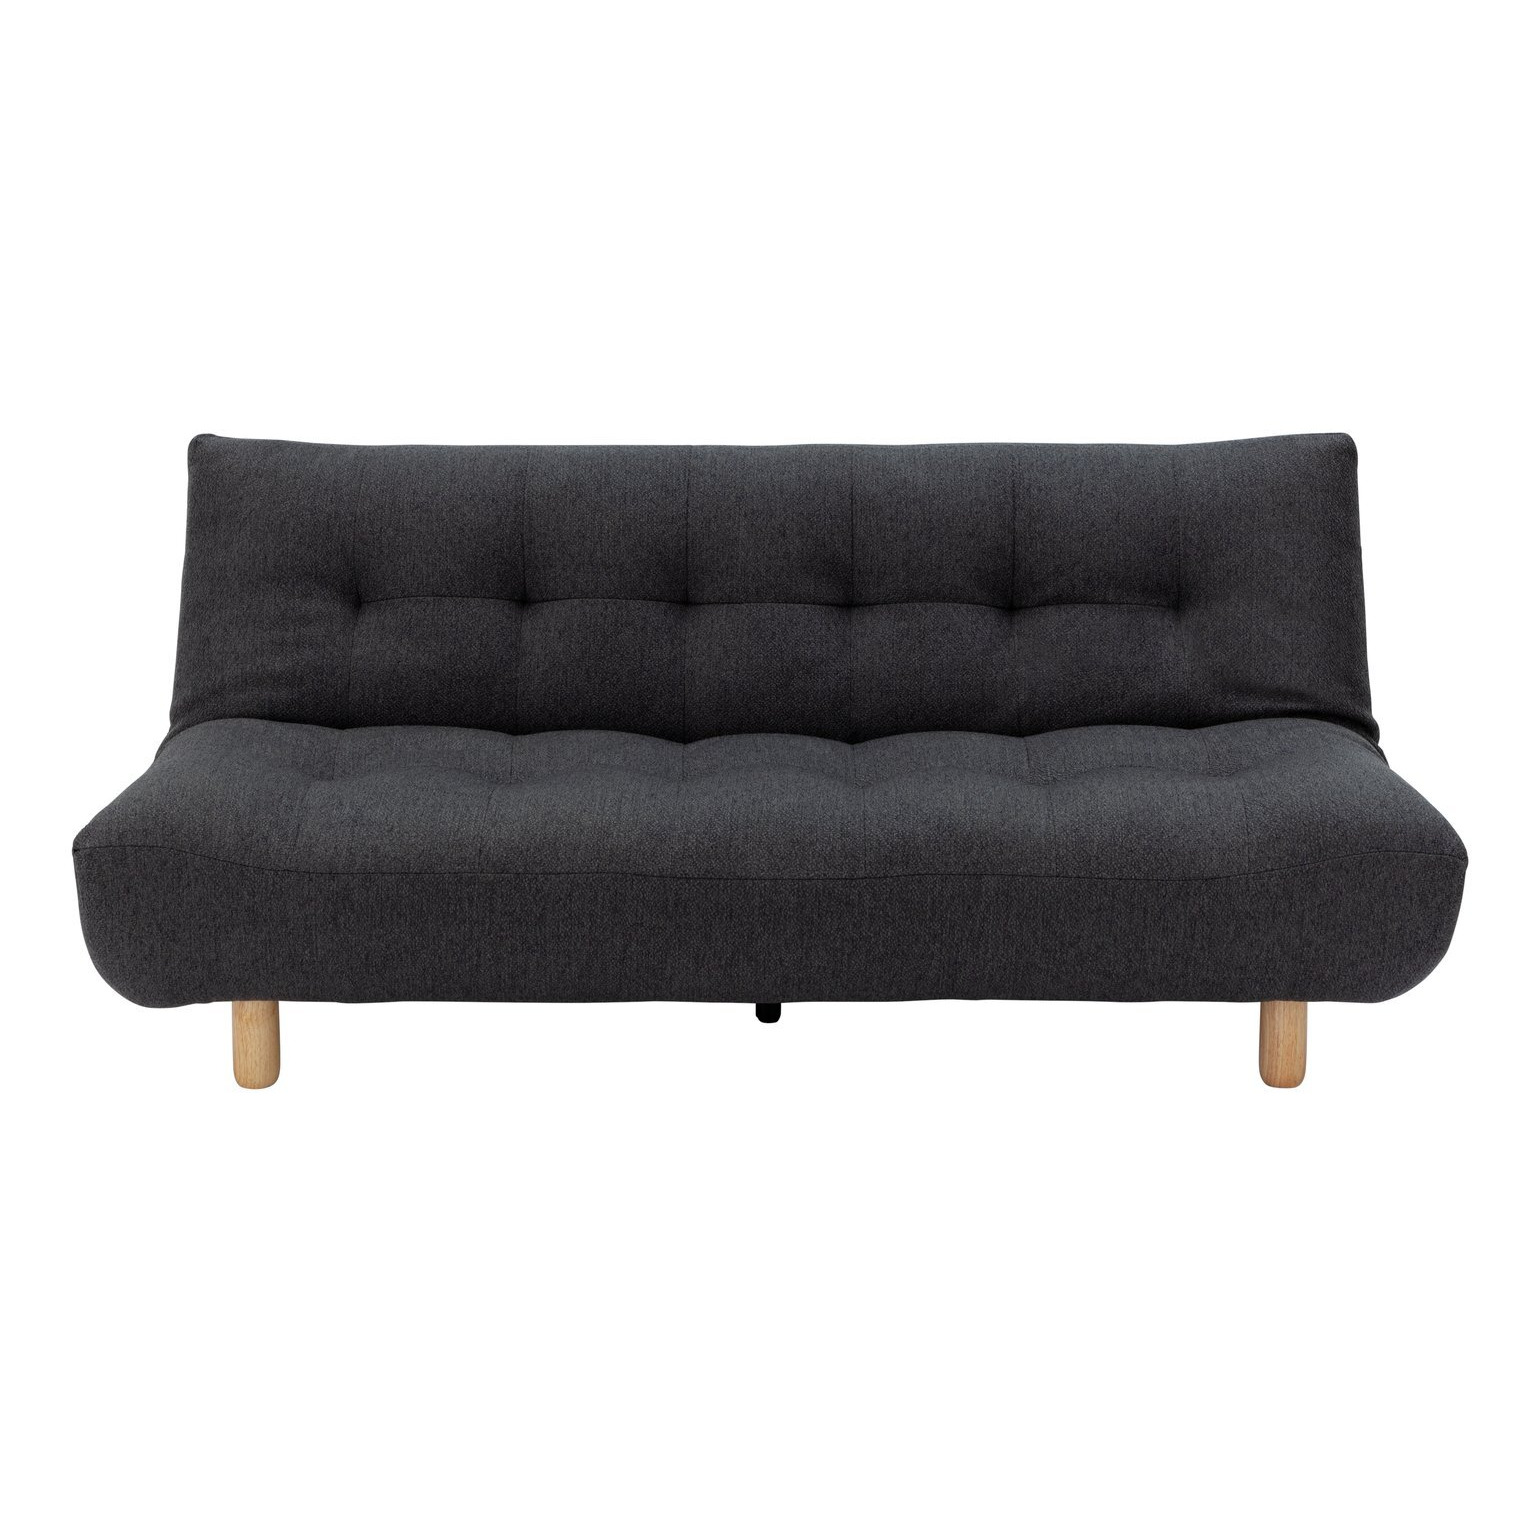 Habitat Kota BoucleFabric 3 Seater ClicClac SofaBed-Charcoal